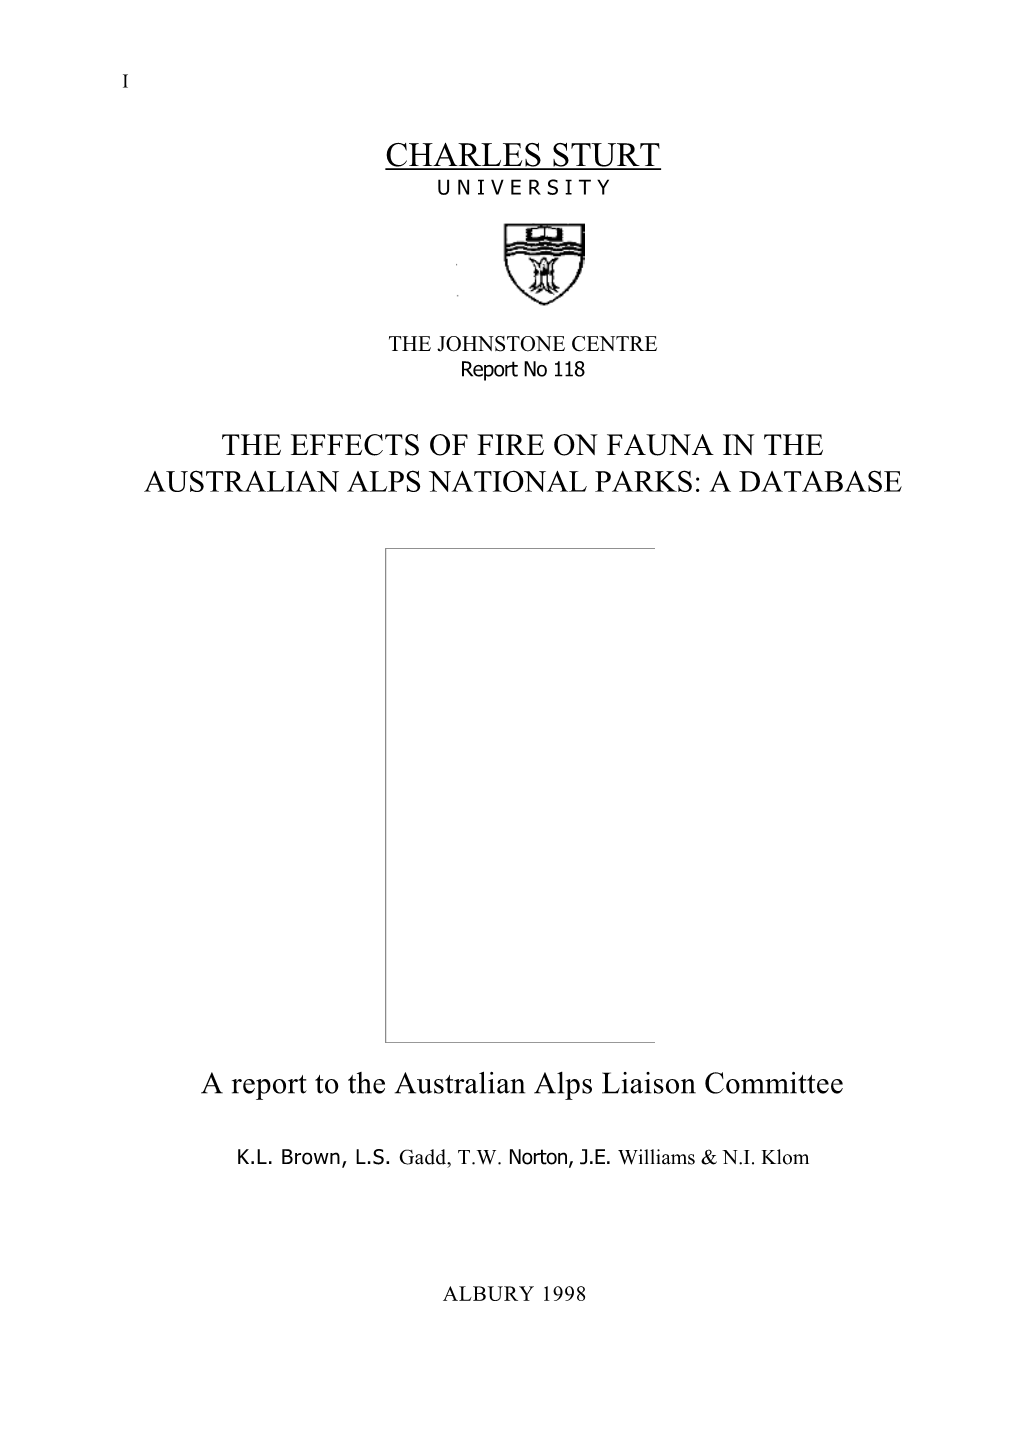 The Effects of Fire on Fauna in The